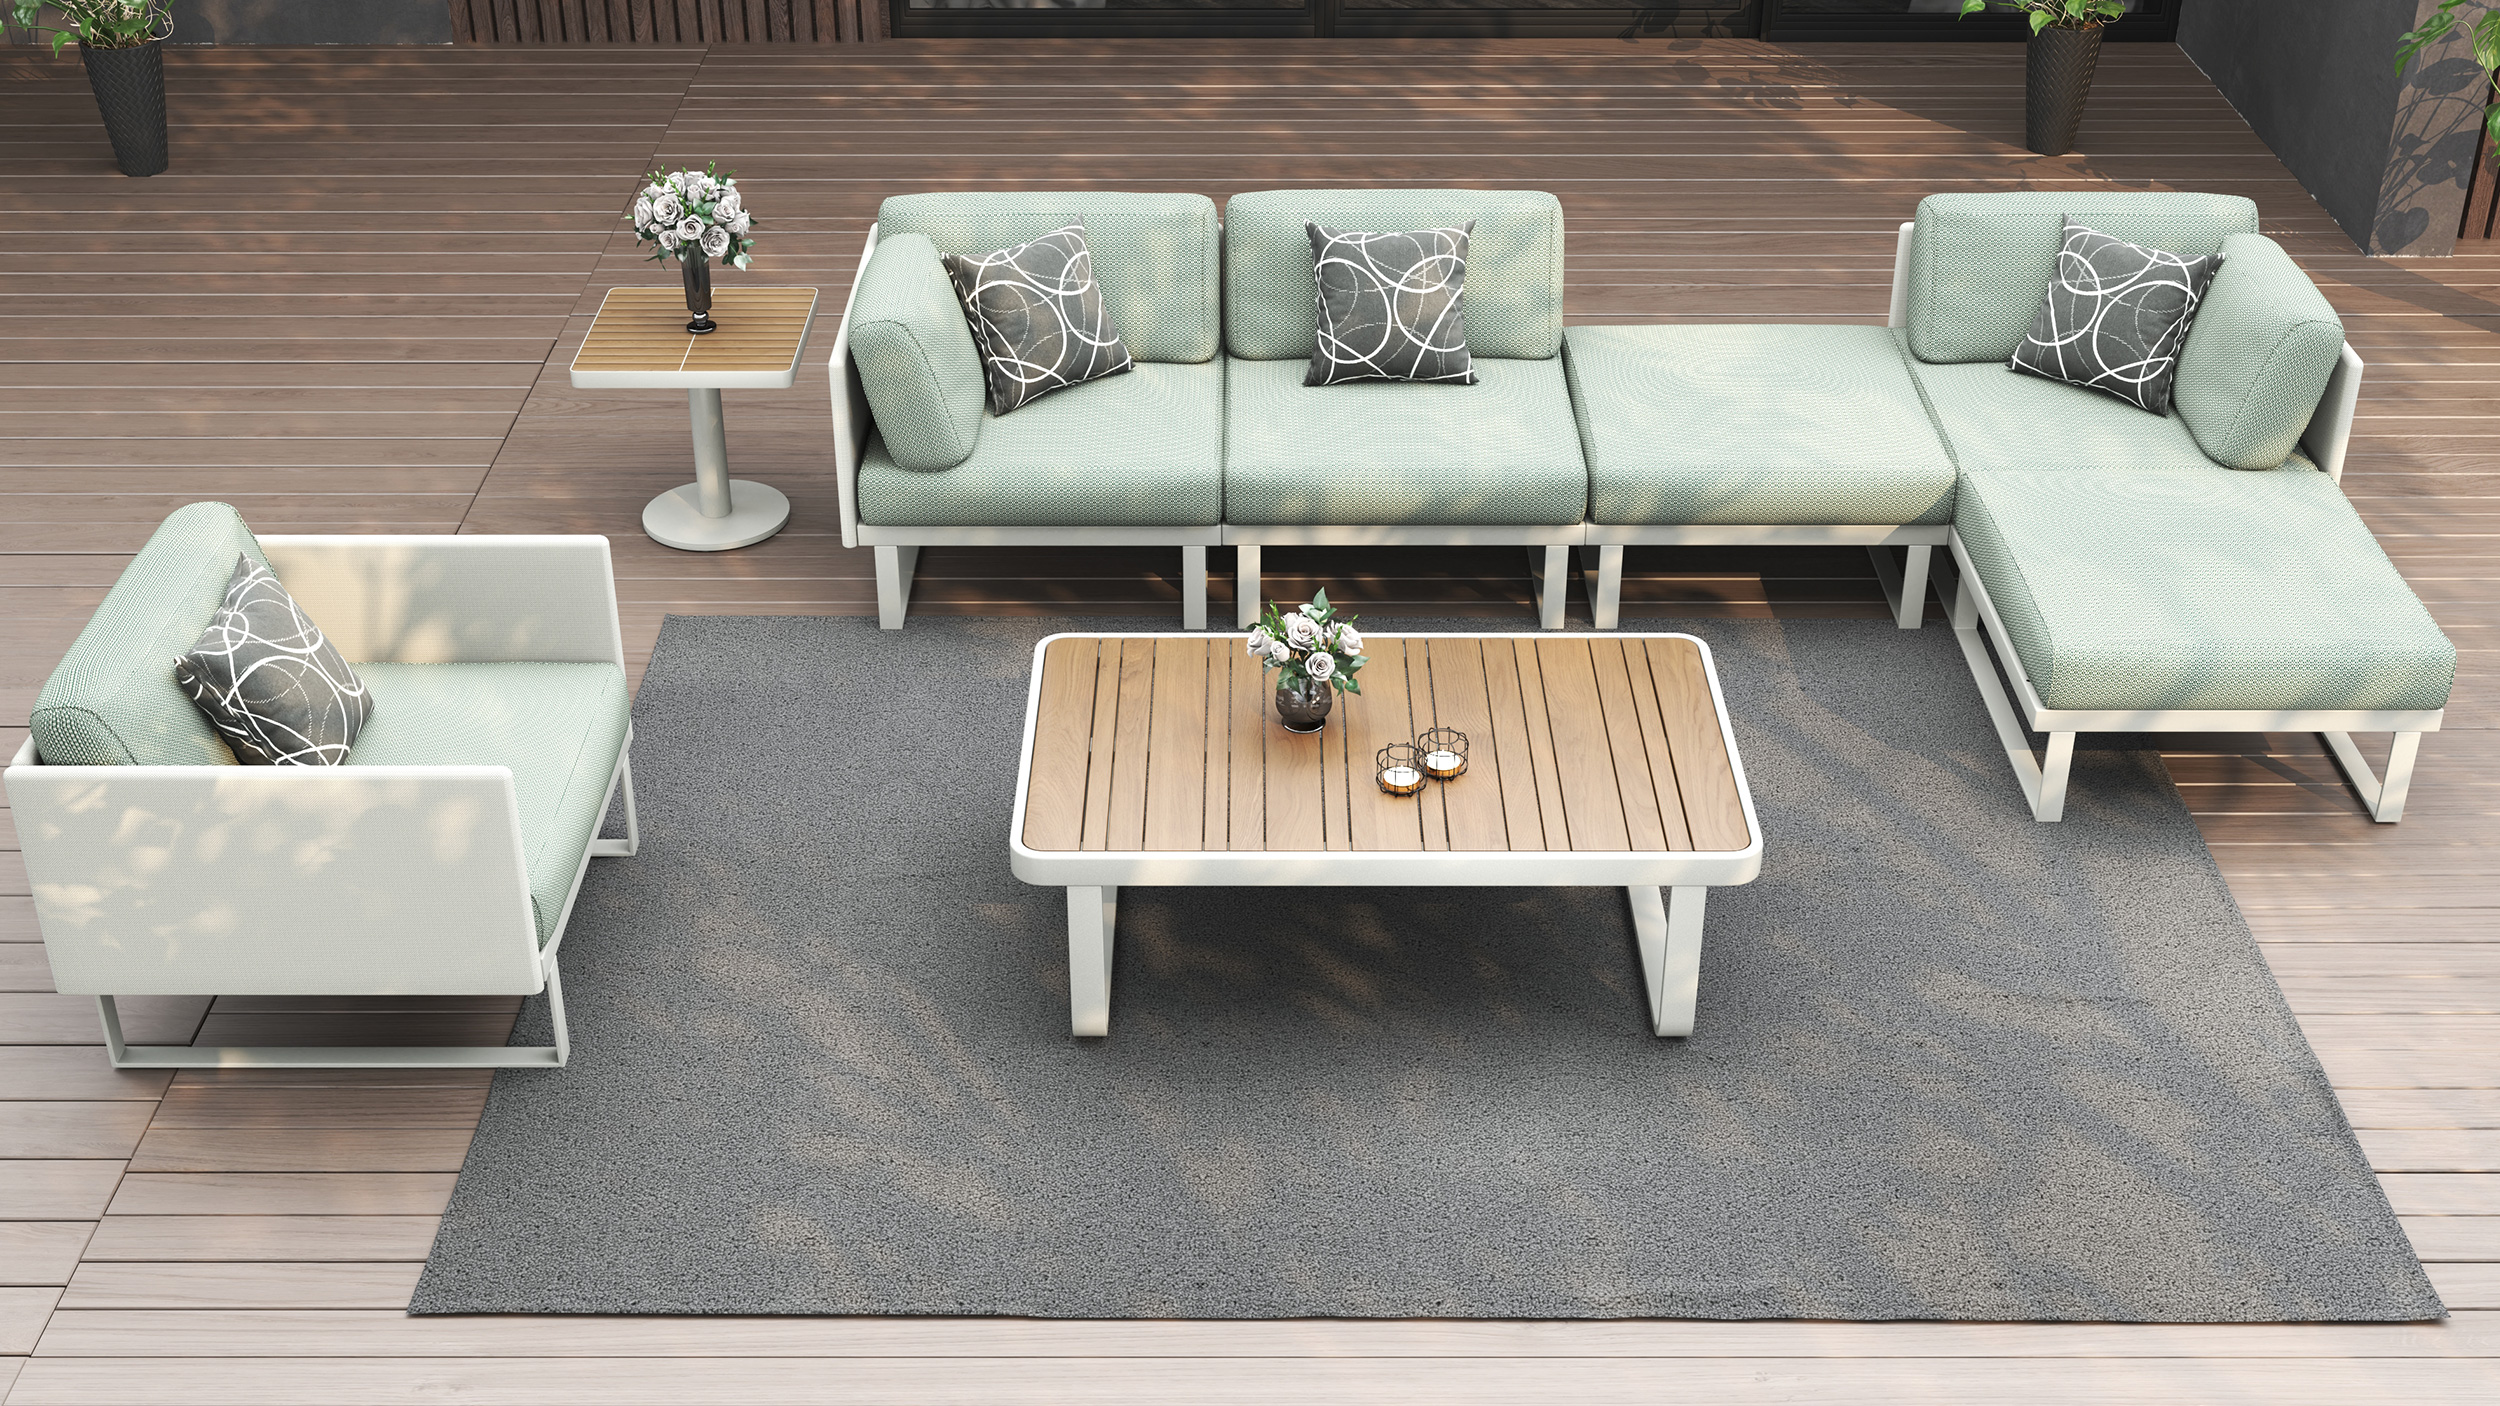 VENTE COFFEE TABLE WITH SUAVE MODULAR FONTELINA GREEN TOP VIEW.effectsResult